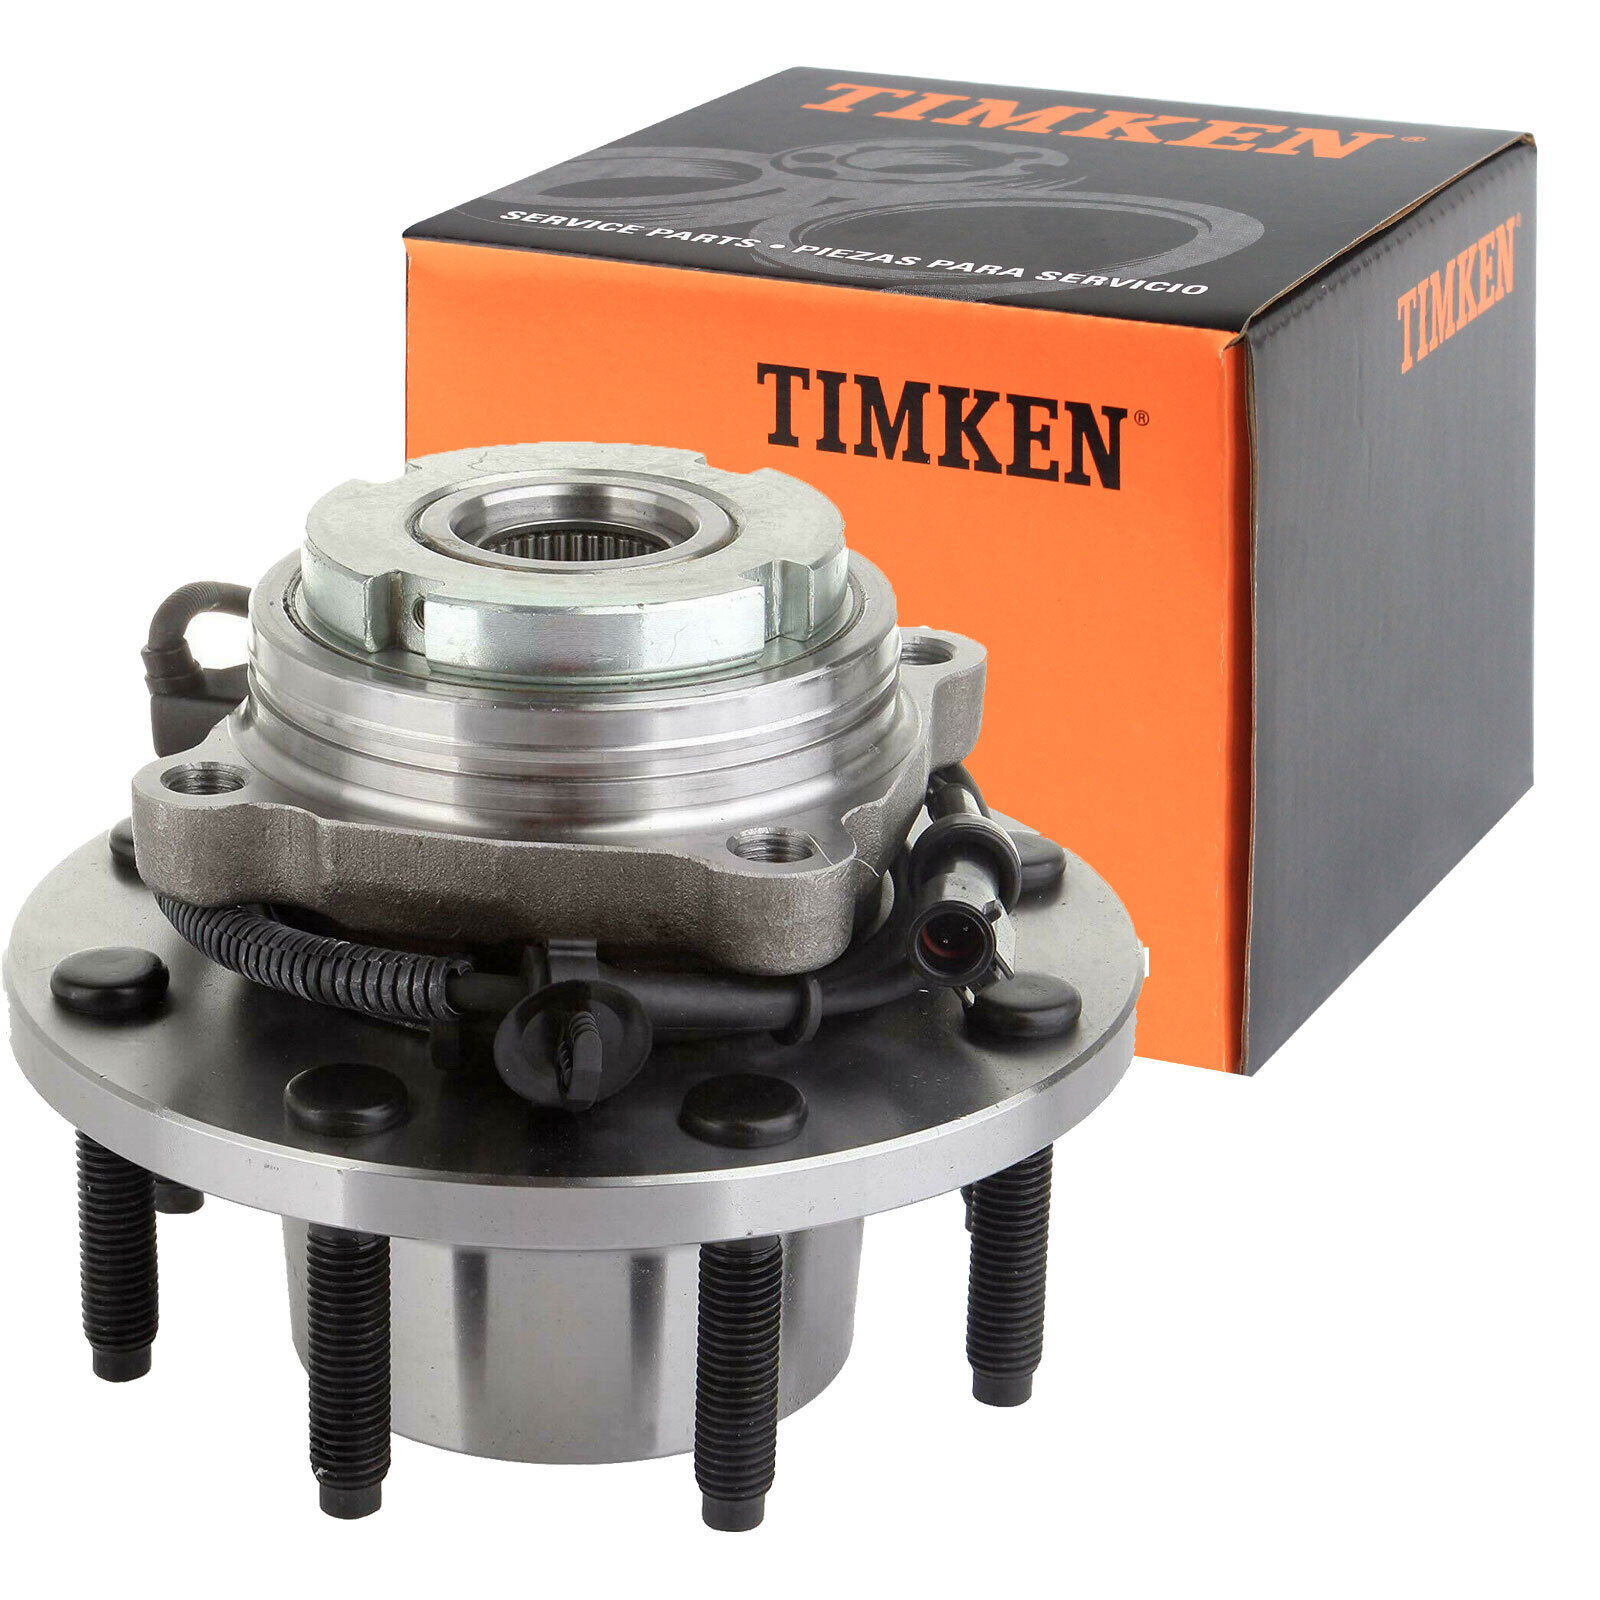 4WD Timken Front Wheel Bearing Ford F-250 F-350 SD Excursion SRW Course Thread